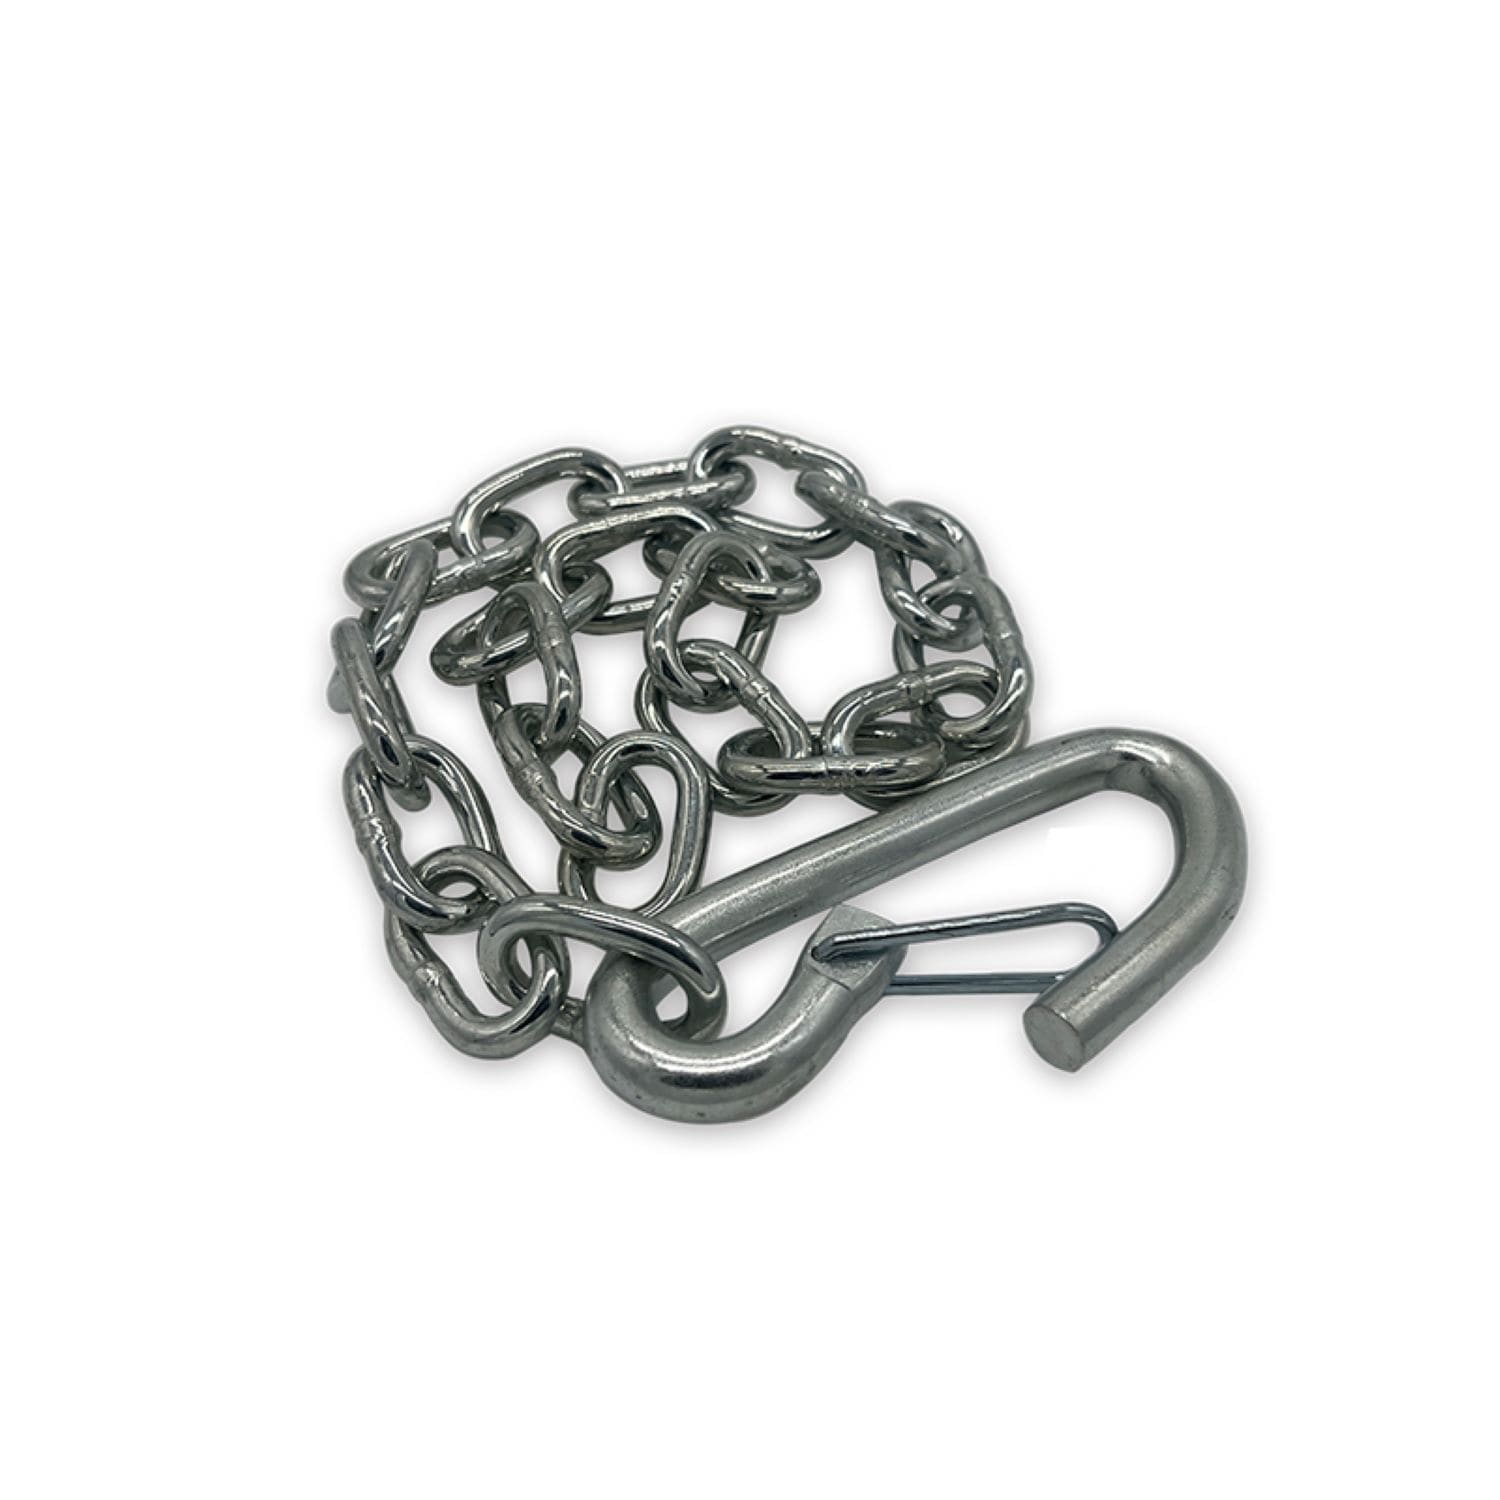 3/16' X 48' Trailer Safety Chain with 3/8' S-Hook for 2000lbs Towing -  China Kit Transport Chain, Safety Trailer Chain